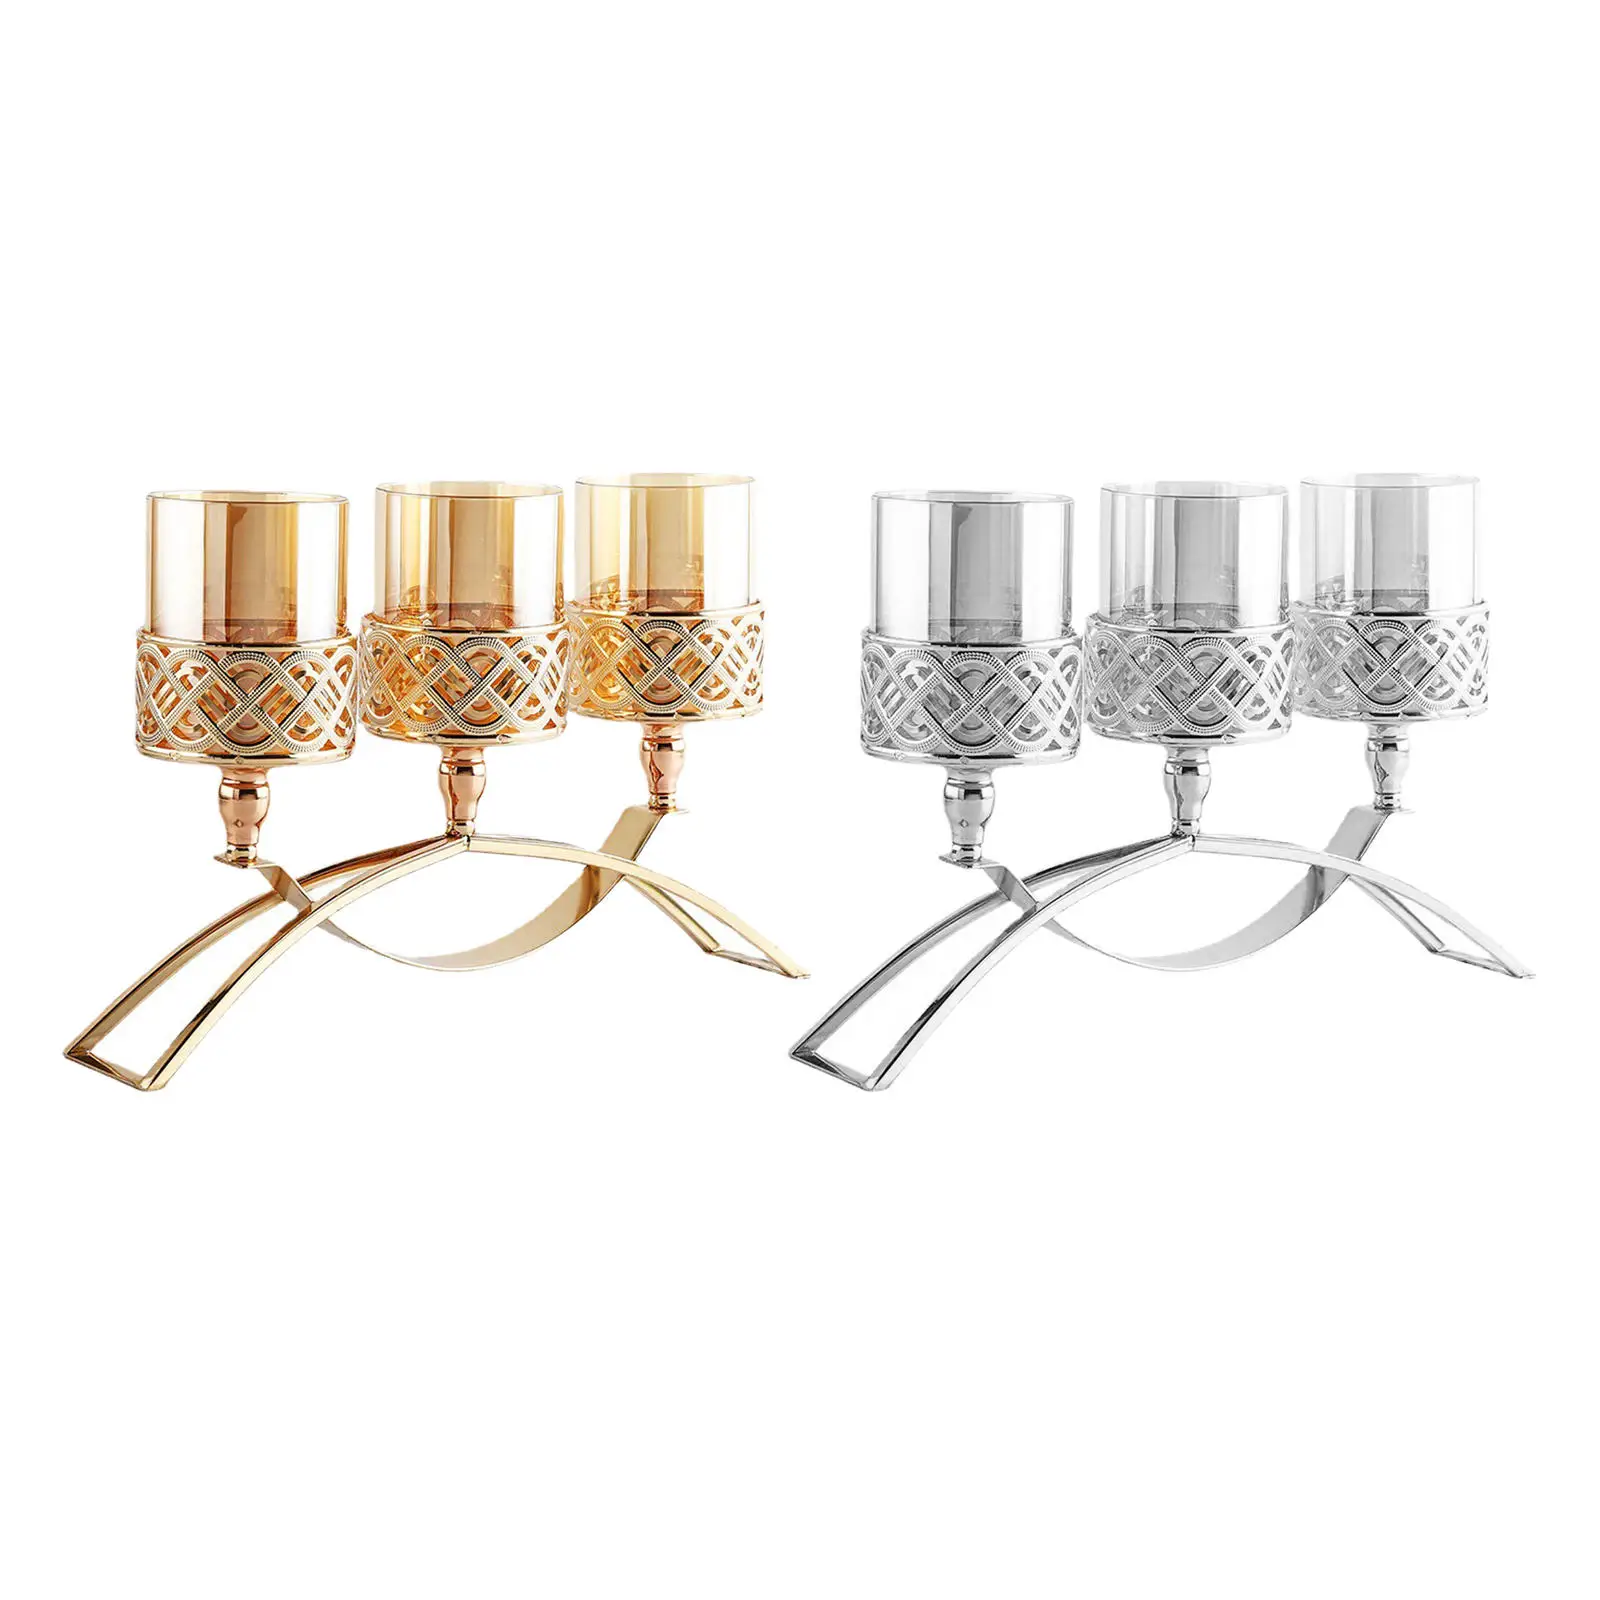 Decorative Crystal Glass Candle Holders Candlestick with 3 Candelabras for Dinning Room